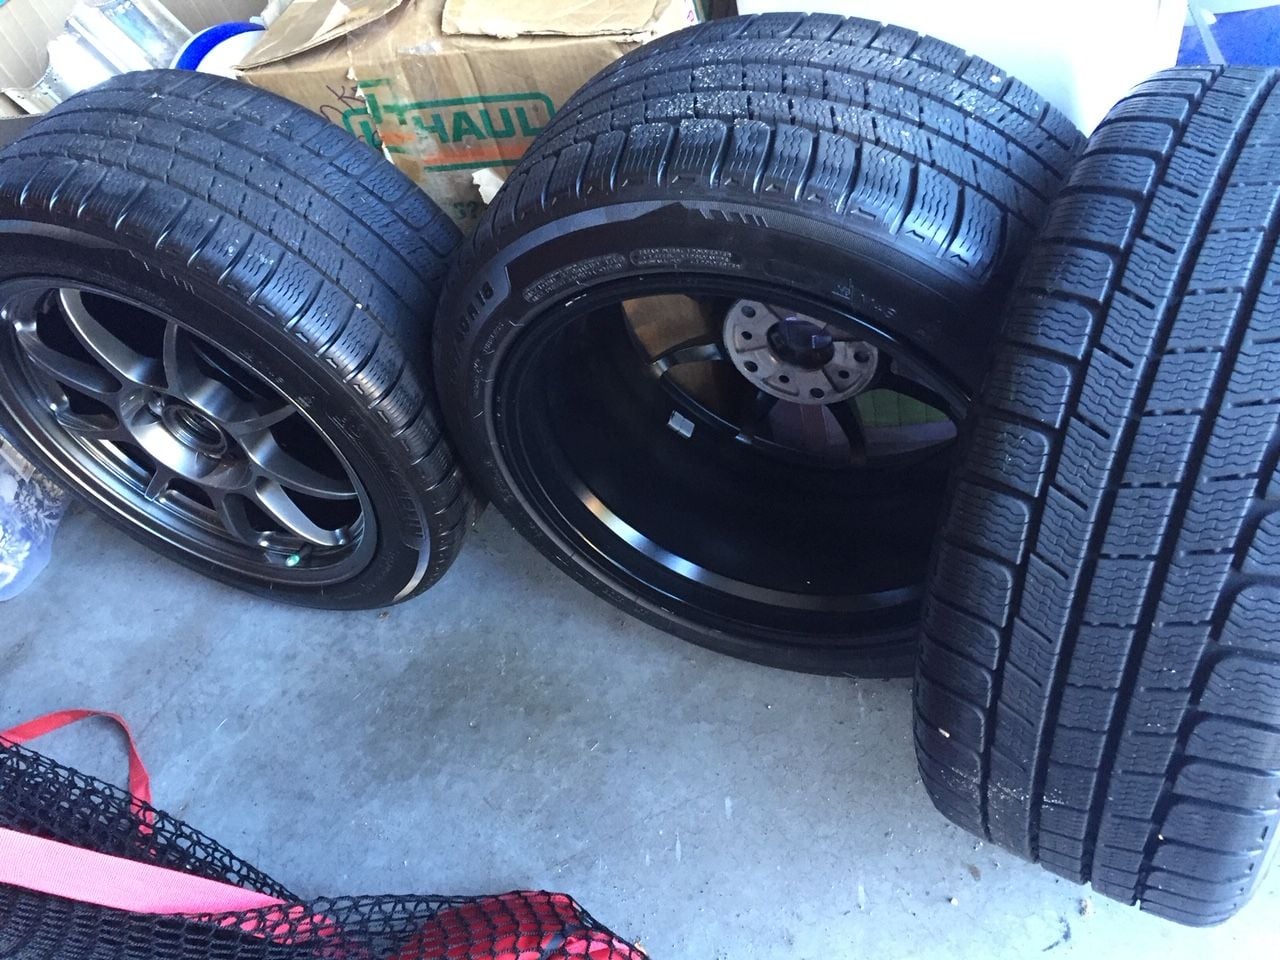 Wheels and Tires/Axles - Winter tires/rims for 997.2 S  OZ Alleggerita and Micheline Apine PA2 - Used - Kansas City, MO 66208, United States